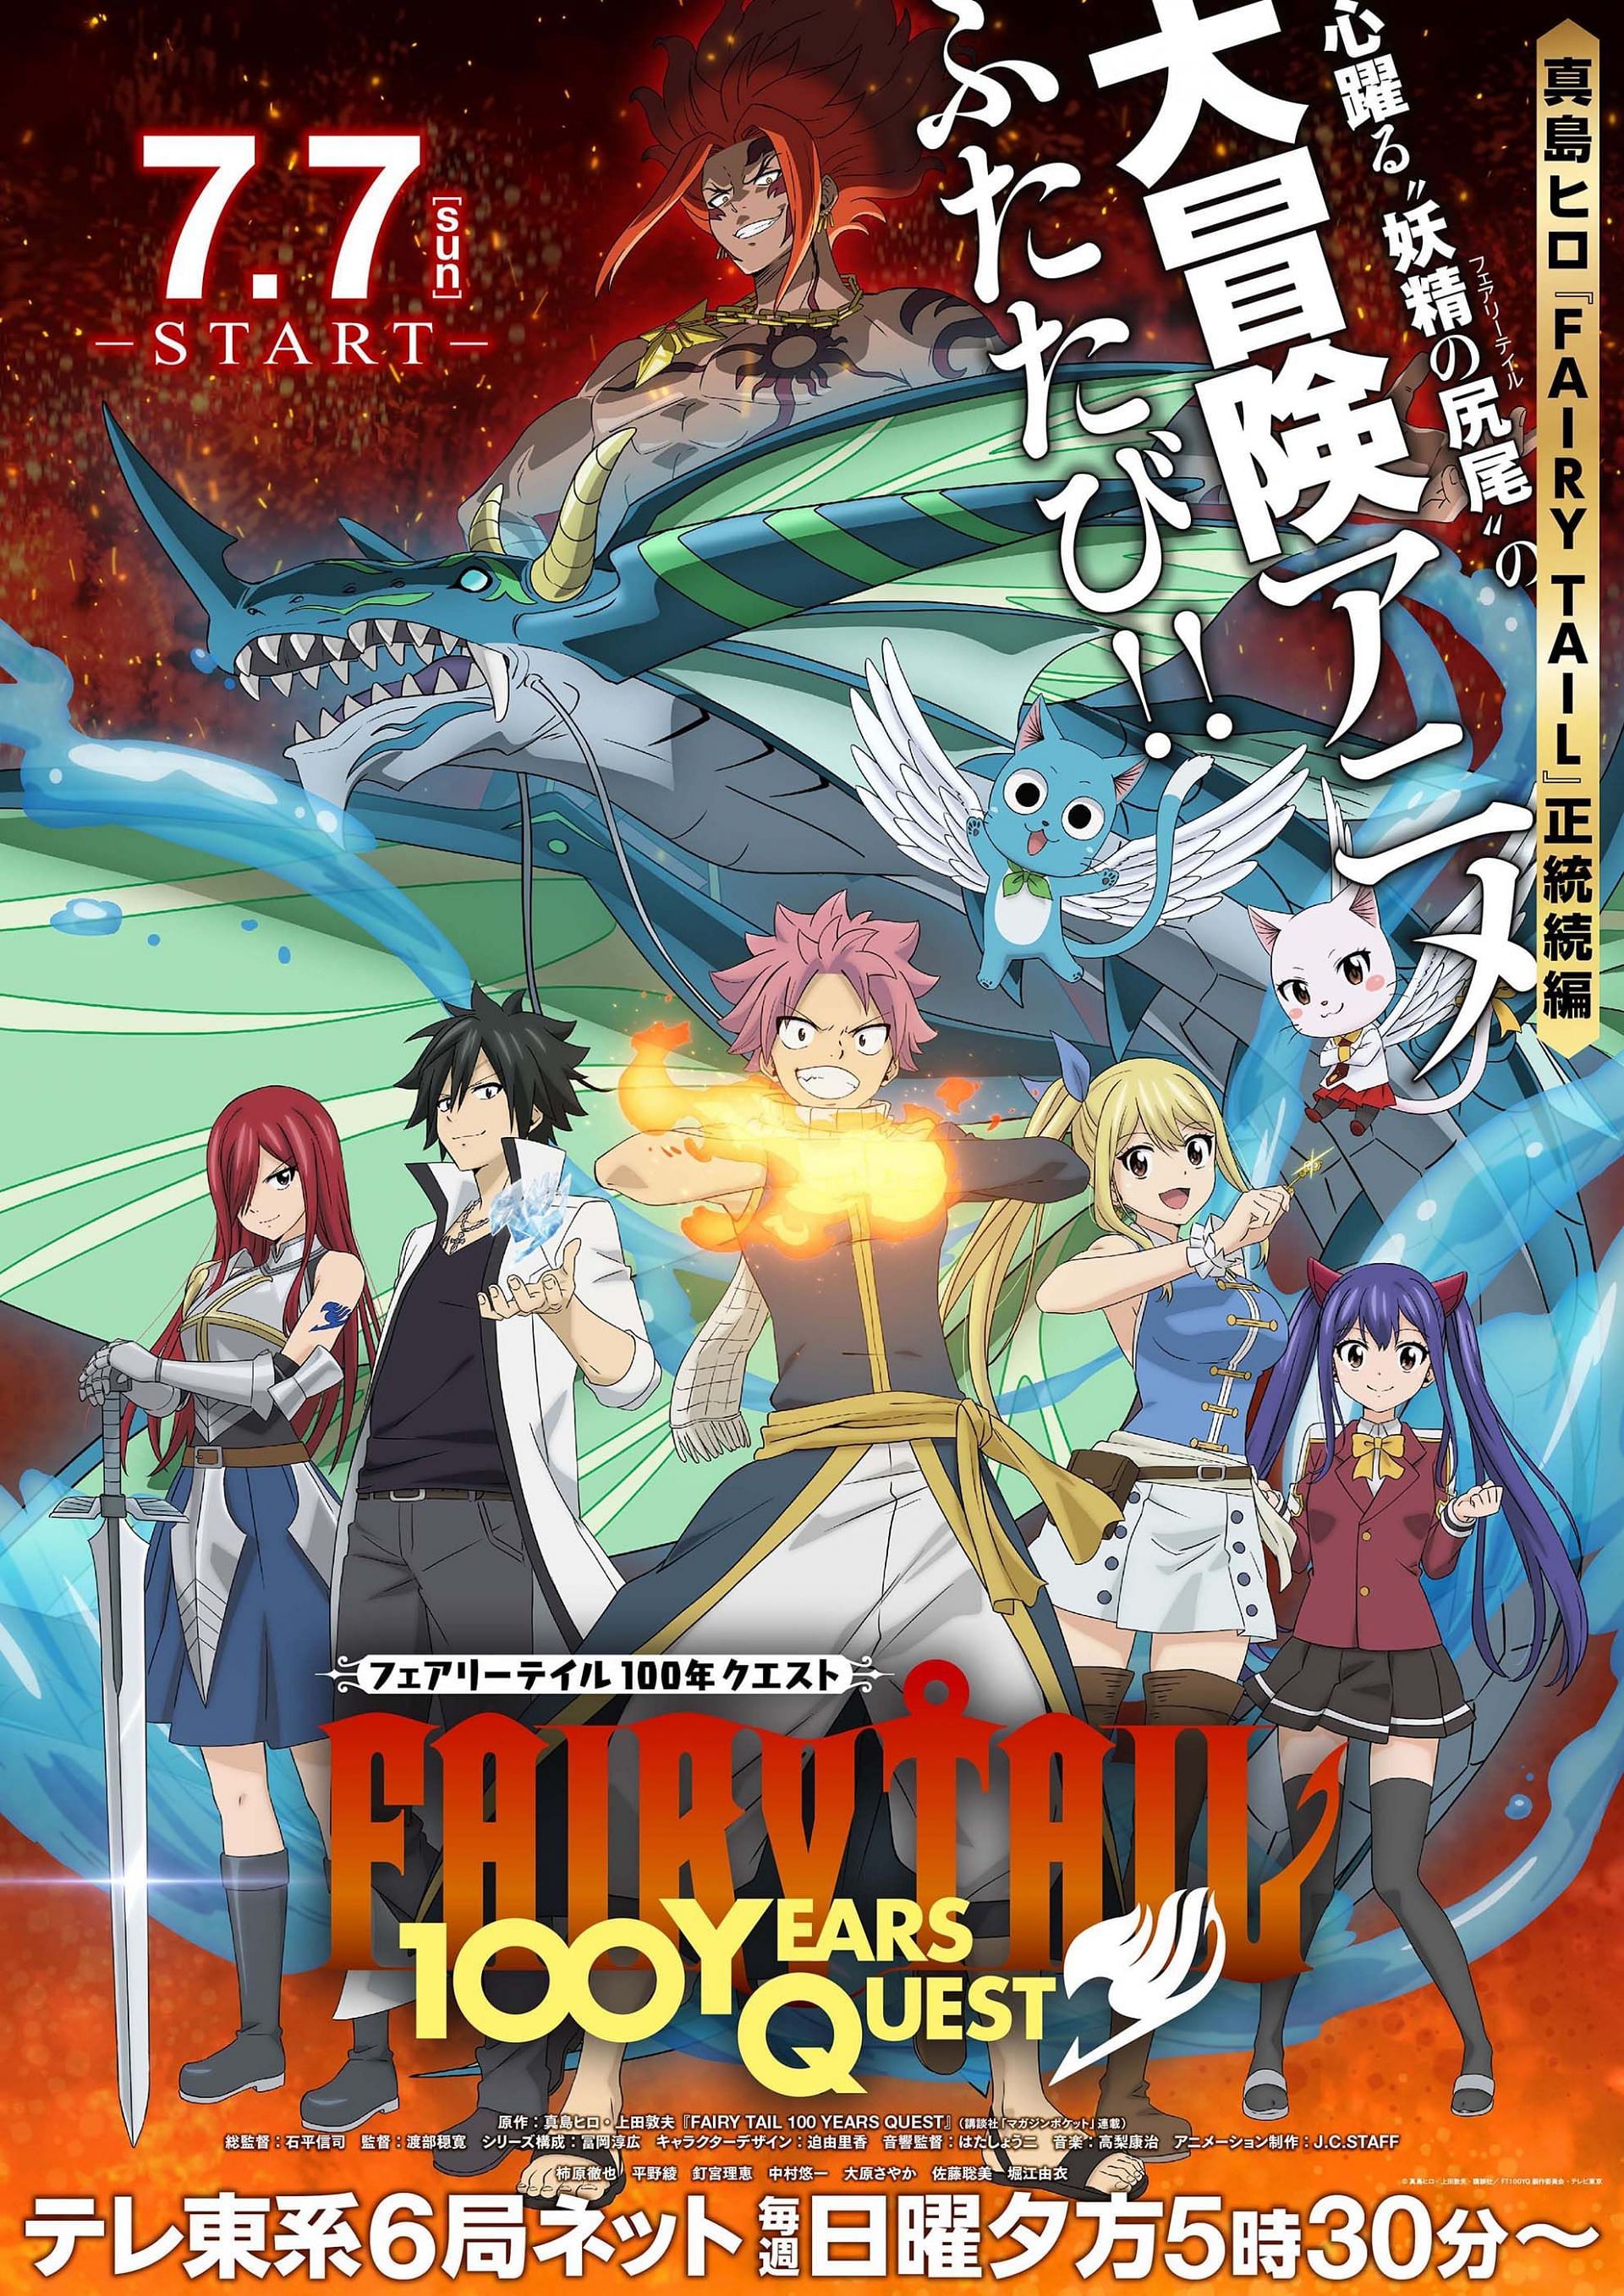 The main visual for Fairy Tail: 100 Years Quest anime (Image via J.C.Staff)